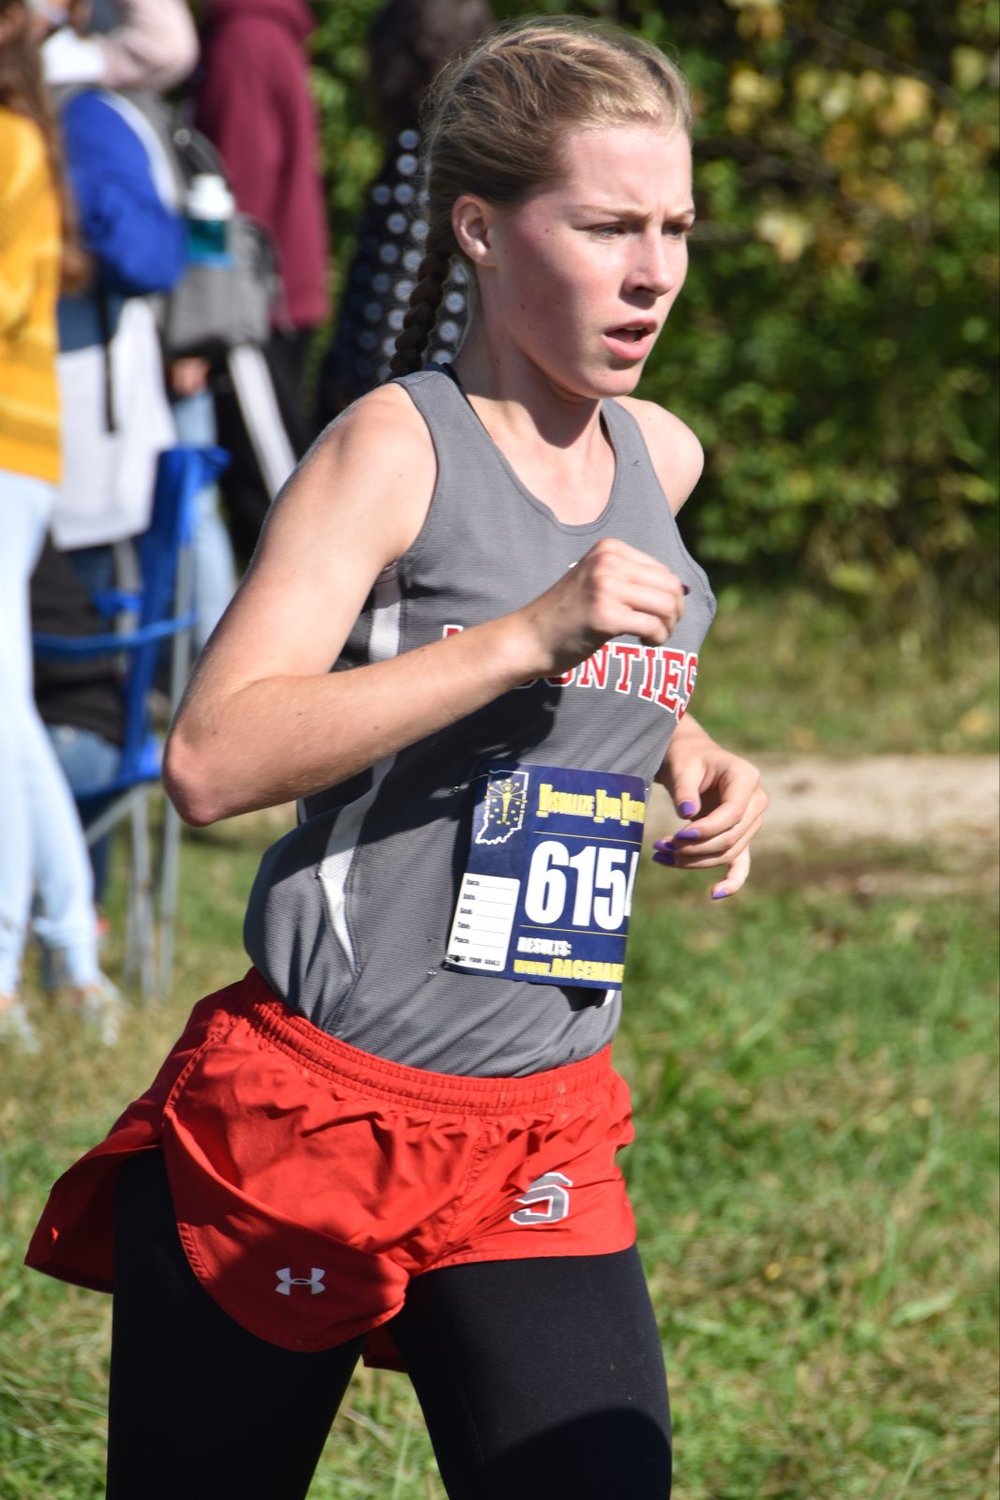 Southmont's Faith Allen advanced to her third straight semi-state with a tenth place finish at the Ben Davis Regional